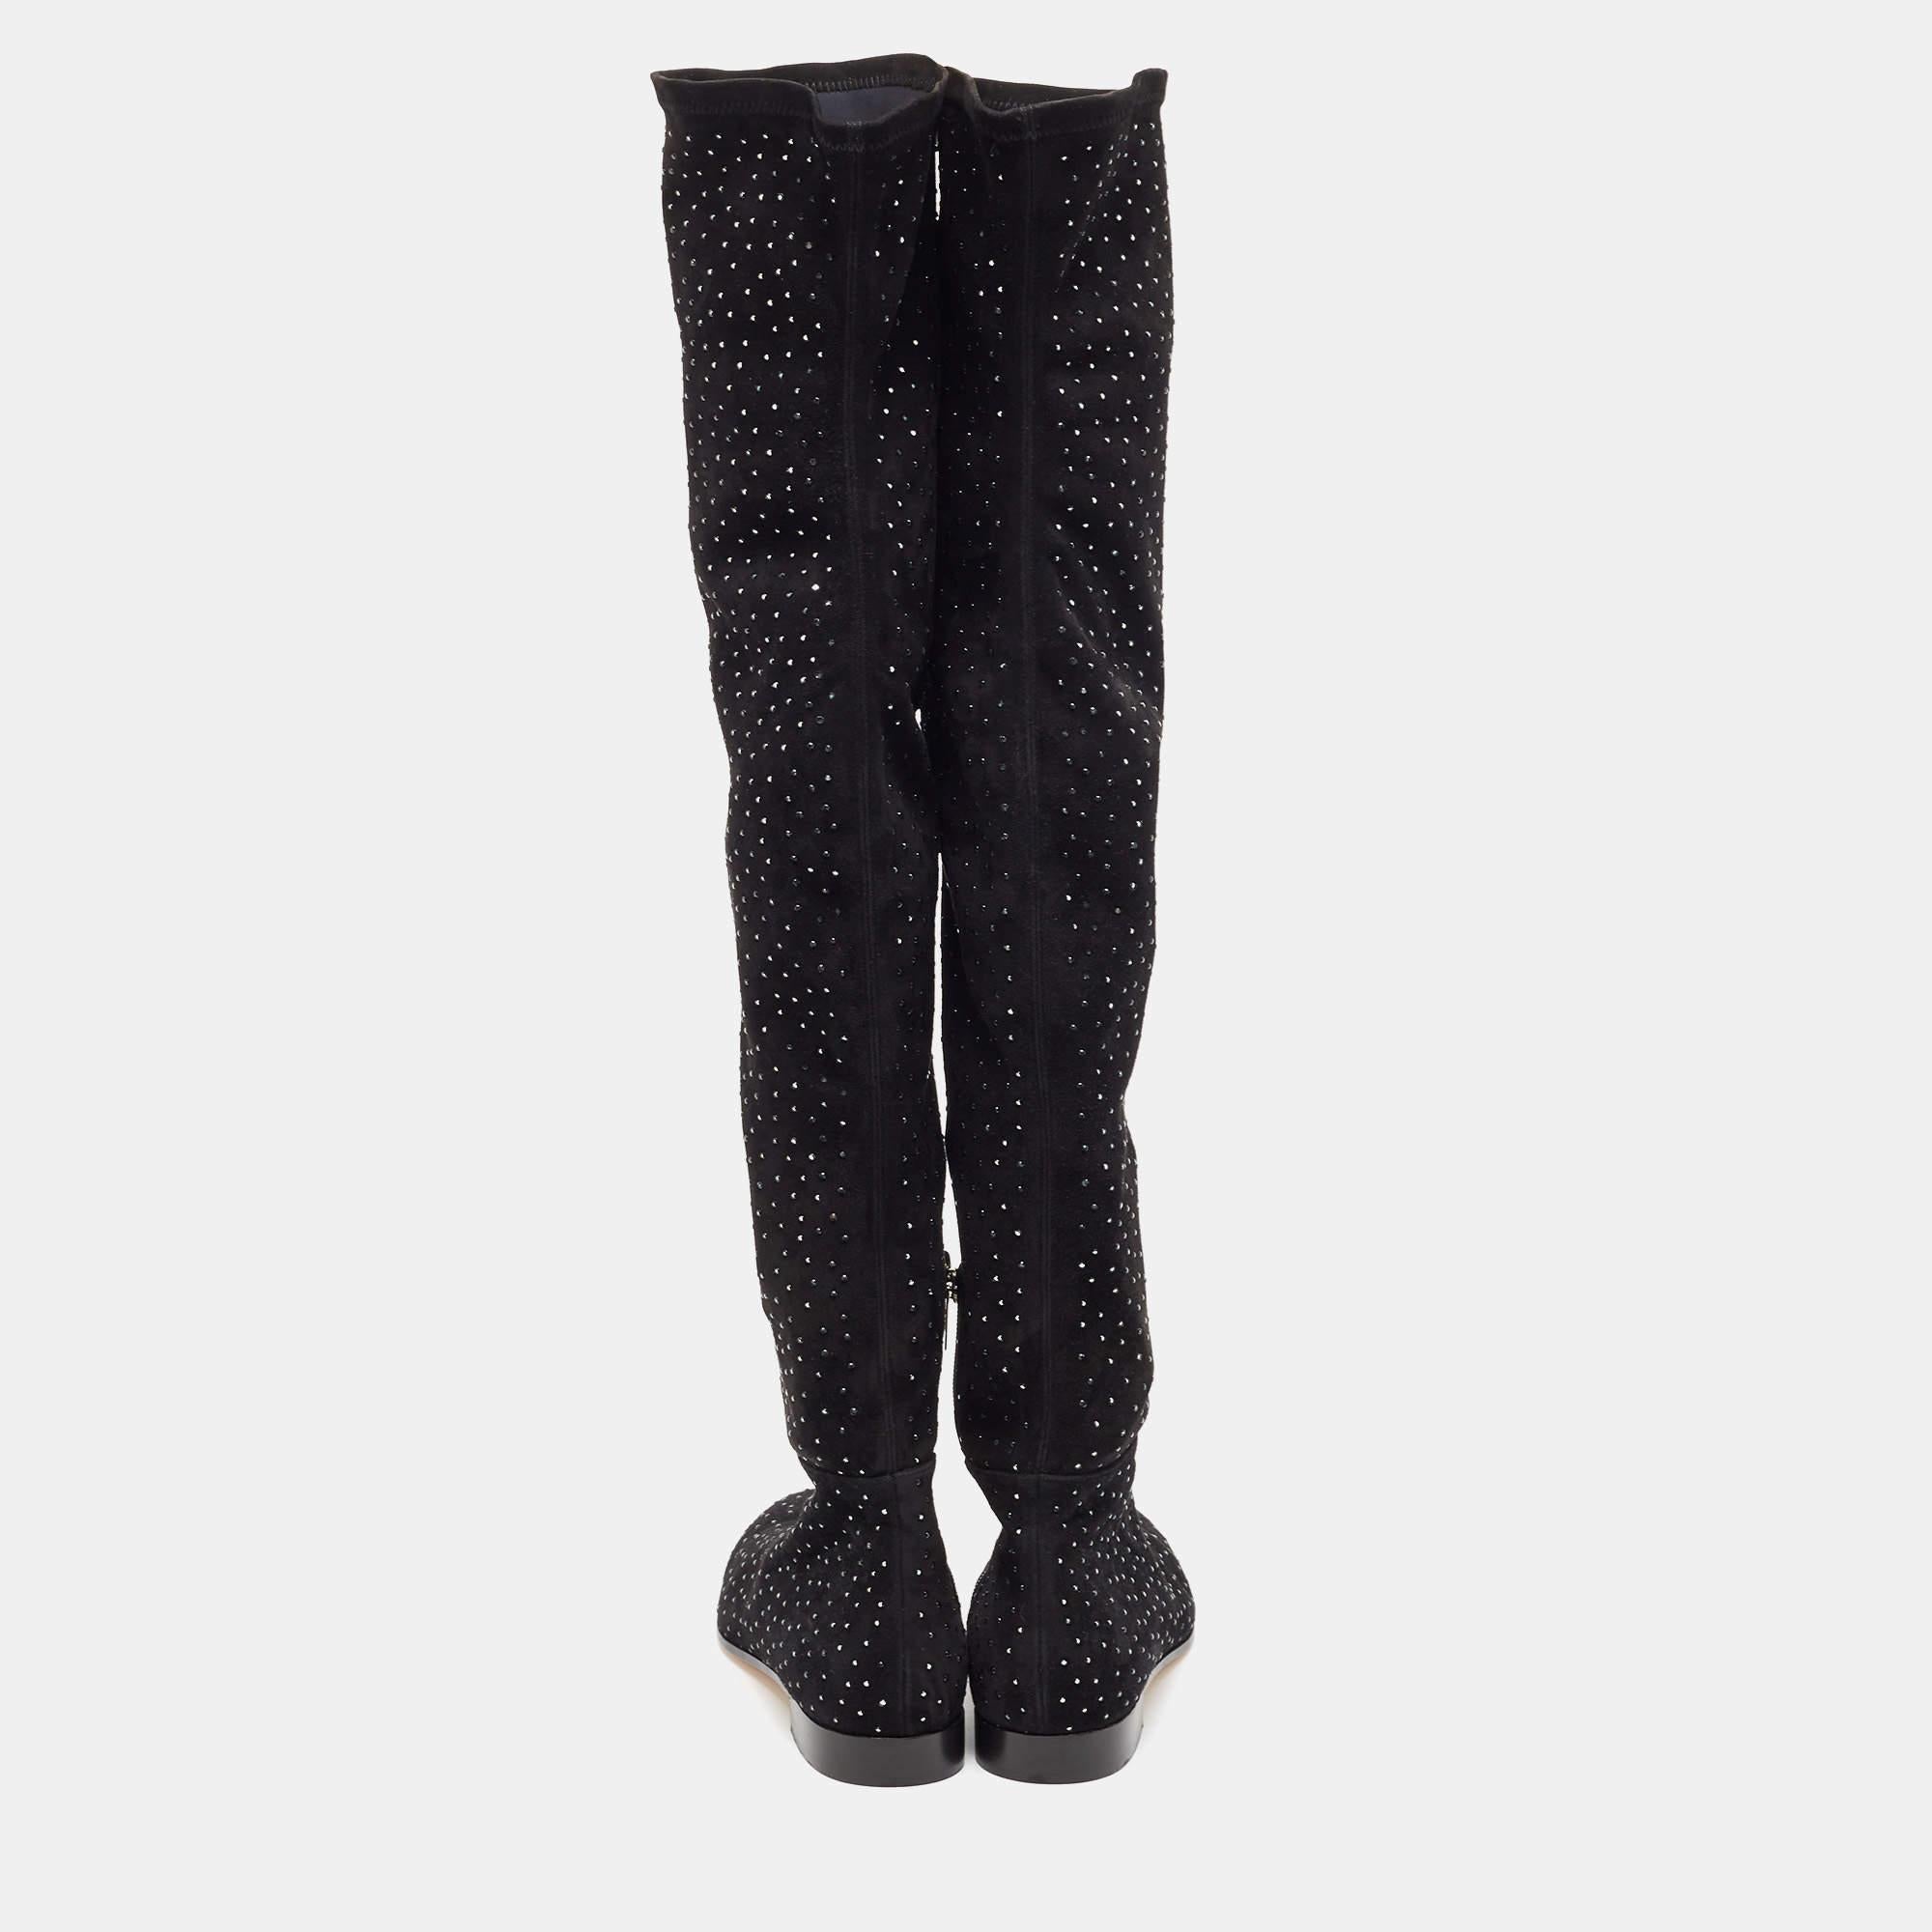 Jimmy Choo Black Suede Embellished Knee Length Boots Size 40 In Excellent Condition For Sale In Dubai, Al Qouz 2